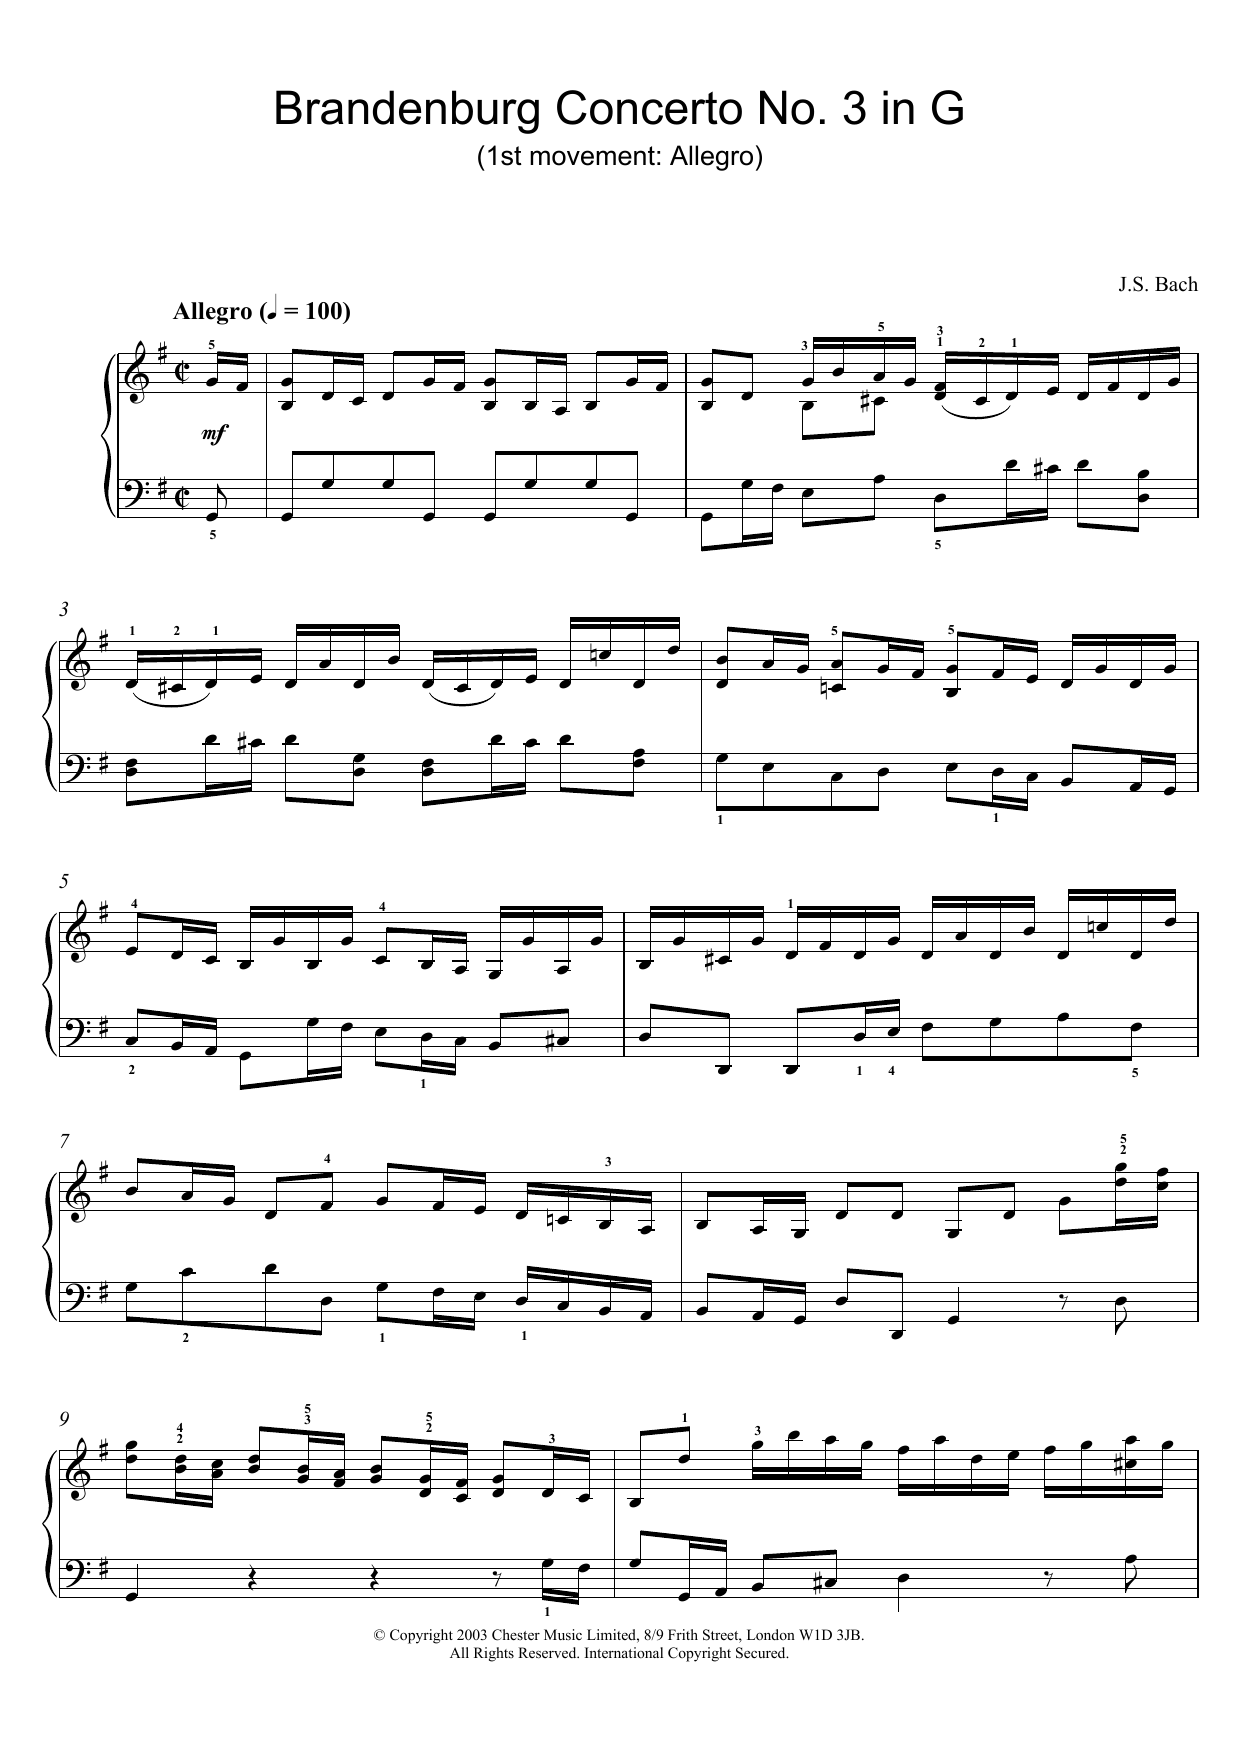 J.S. Bach Brandenburg Concerto No. 3 in G (1st movement: Allegro) sheet music preview music notes and score for Piano including 4 page(s)